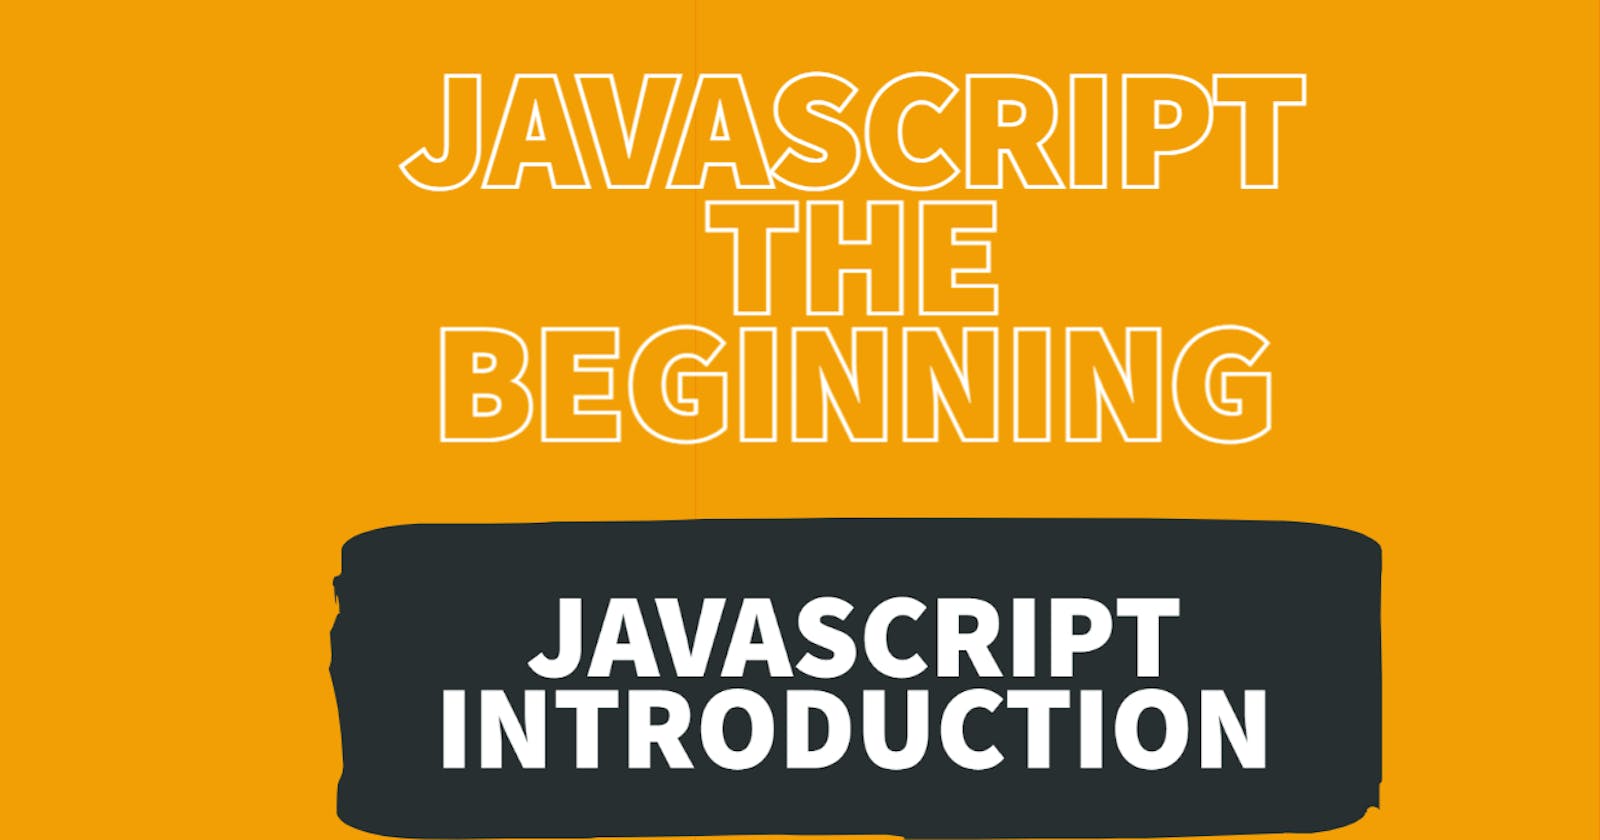 An Introduction to Java Script